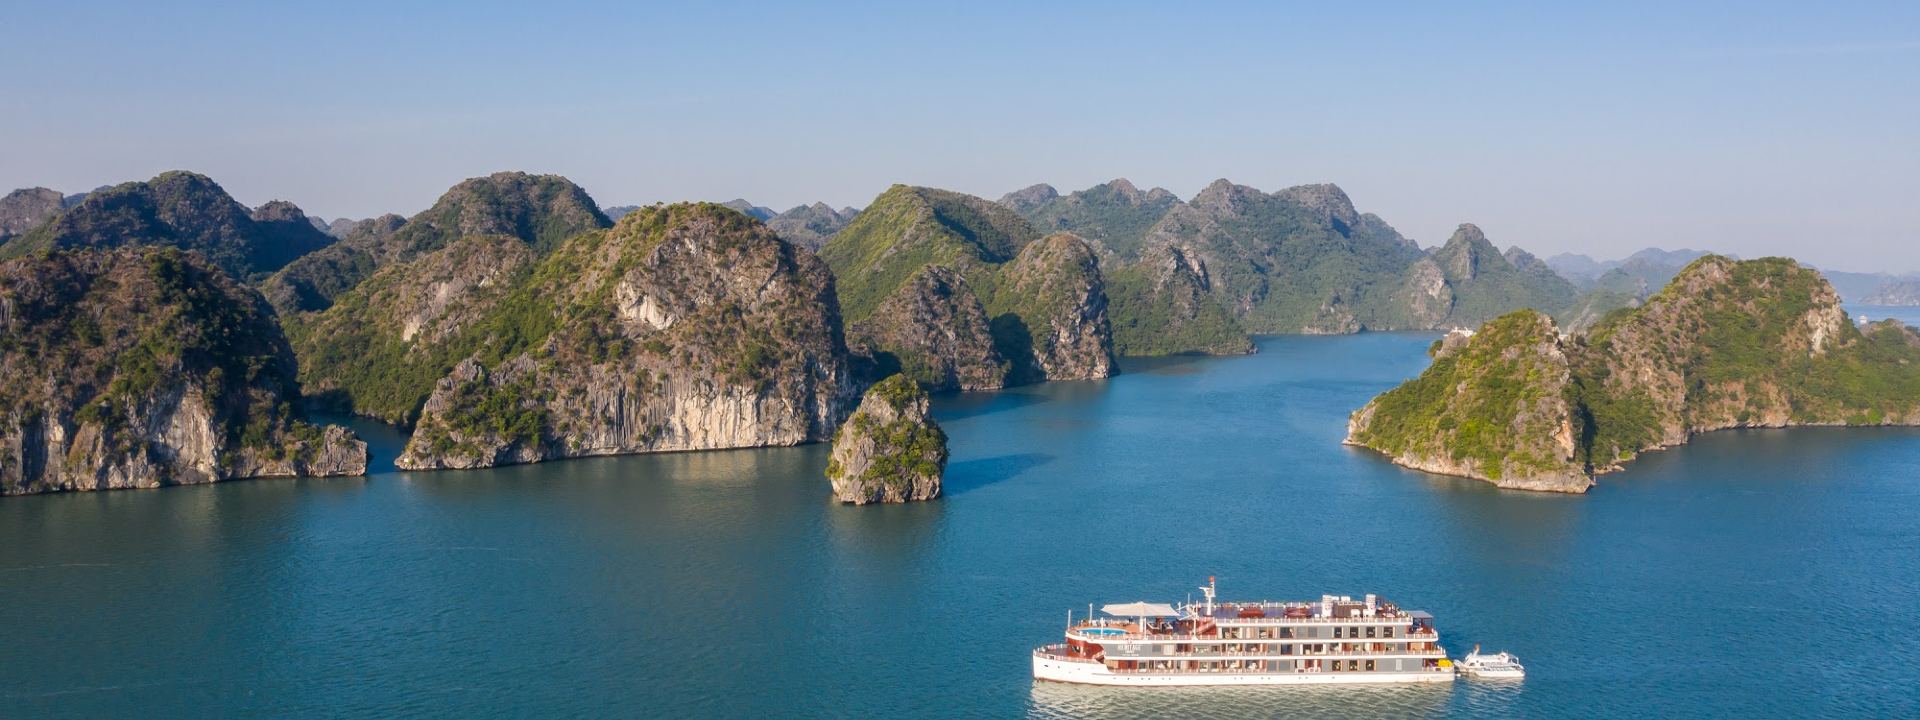 Heritage Ocean Expeditions Following the Coastline of Vietnam from North to South